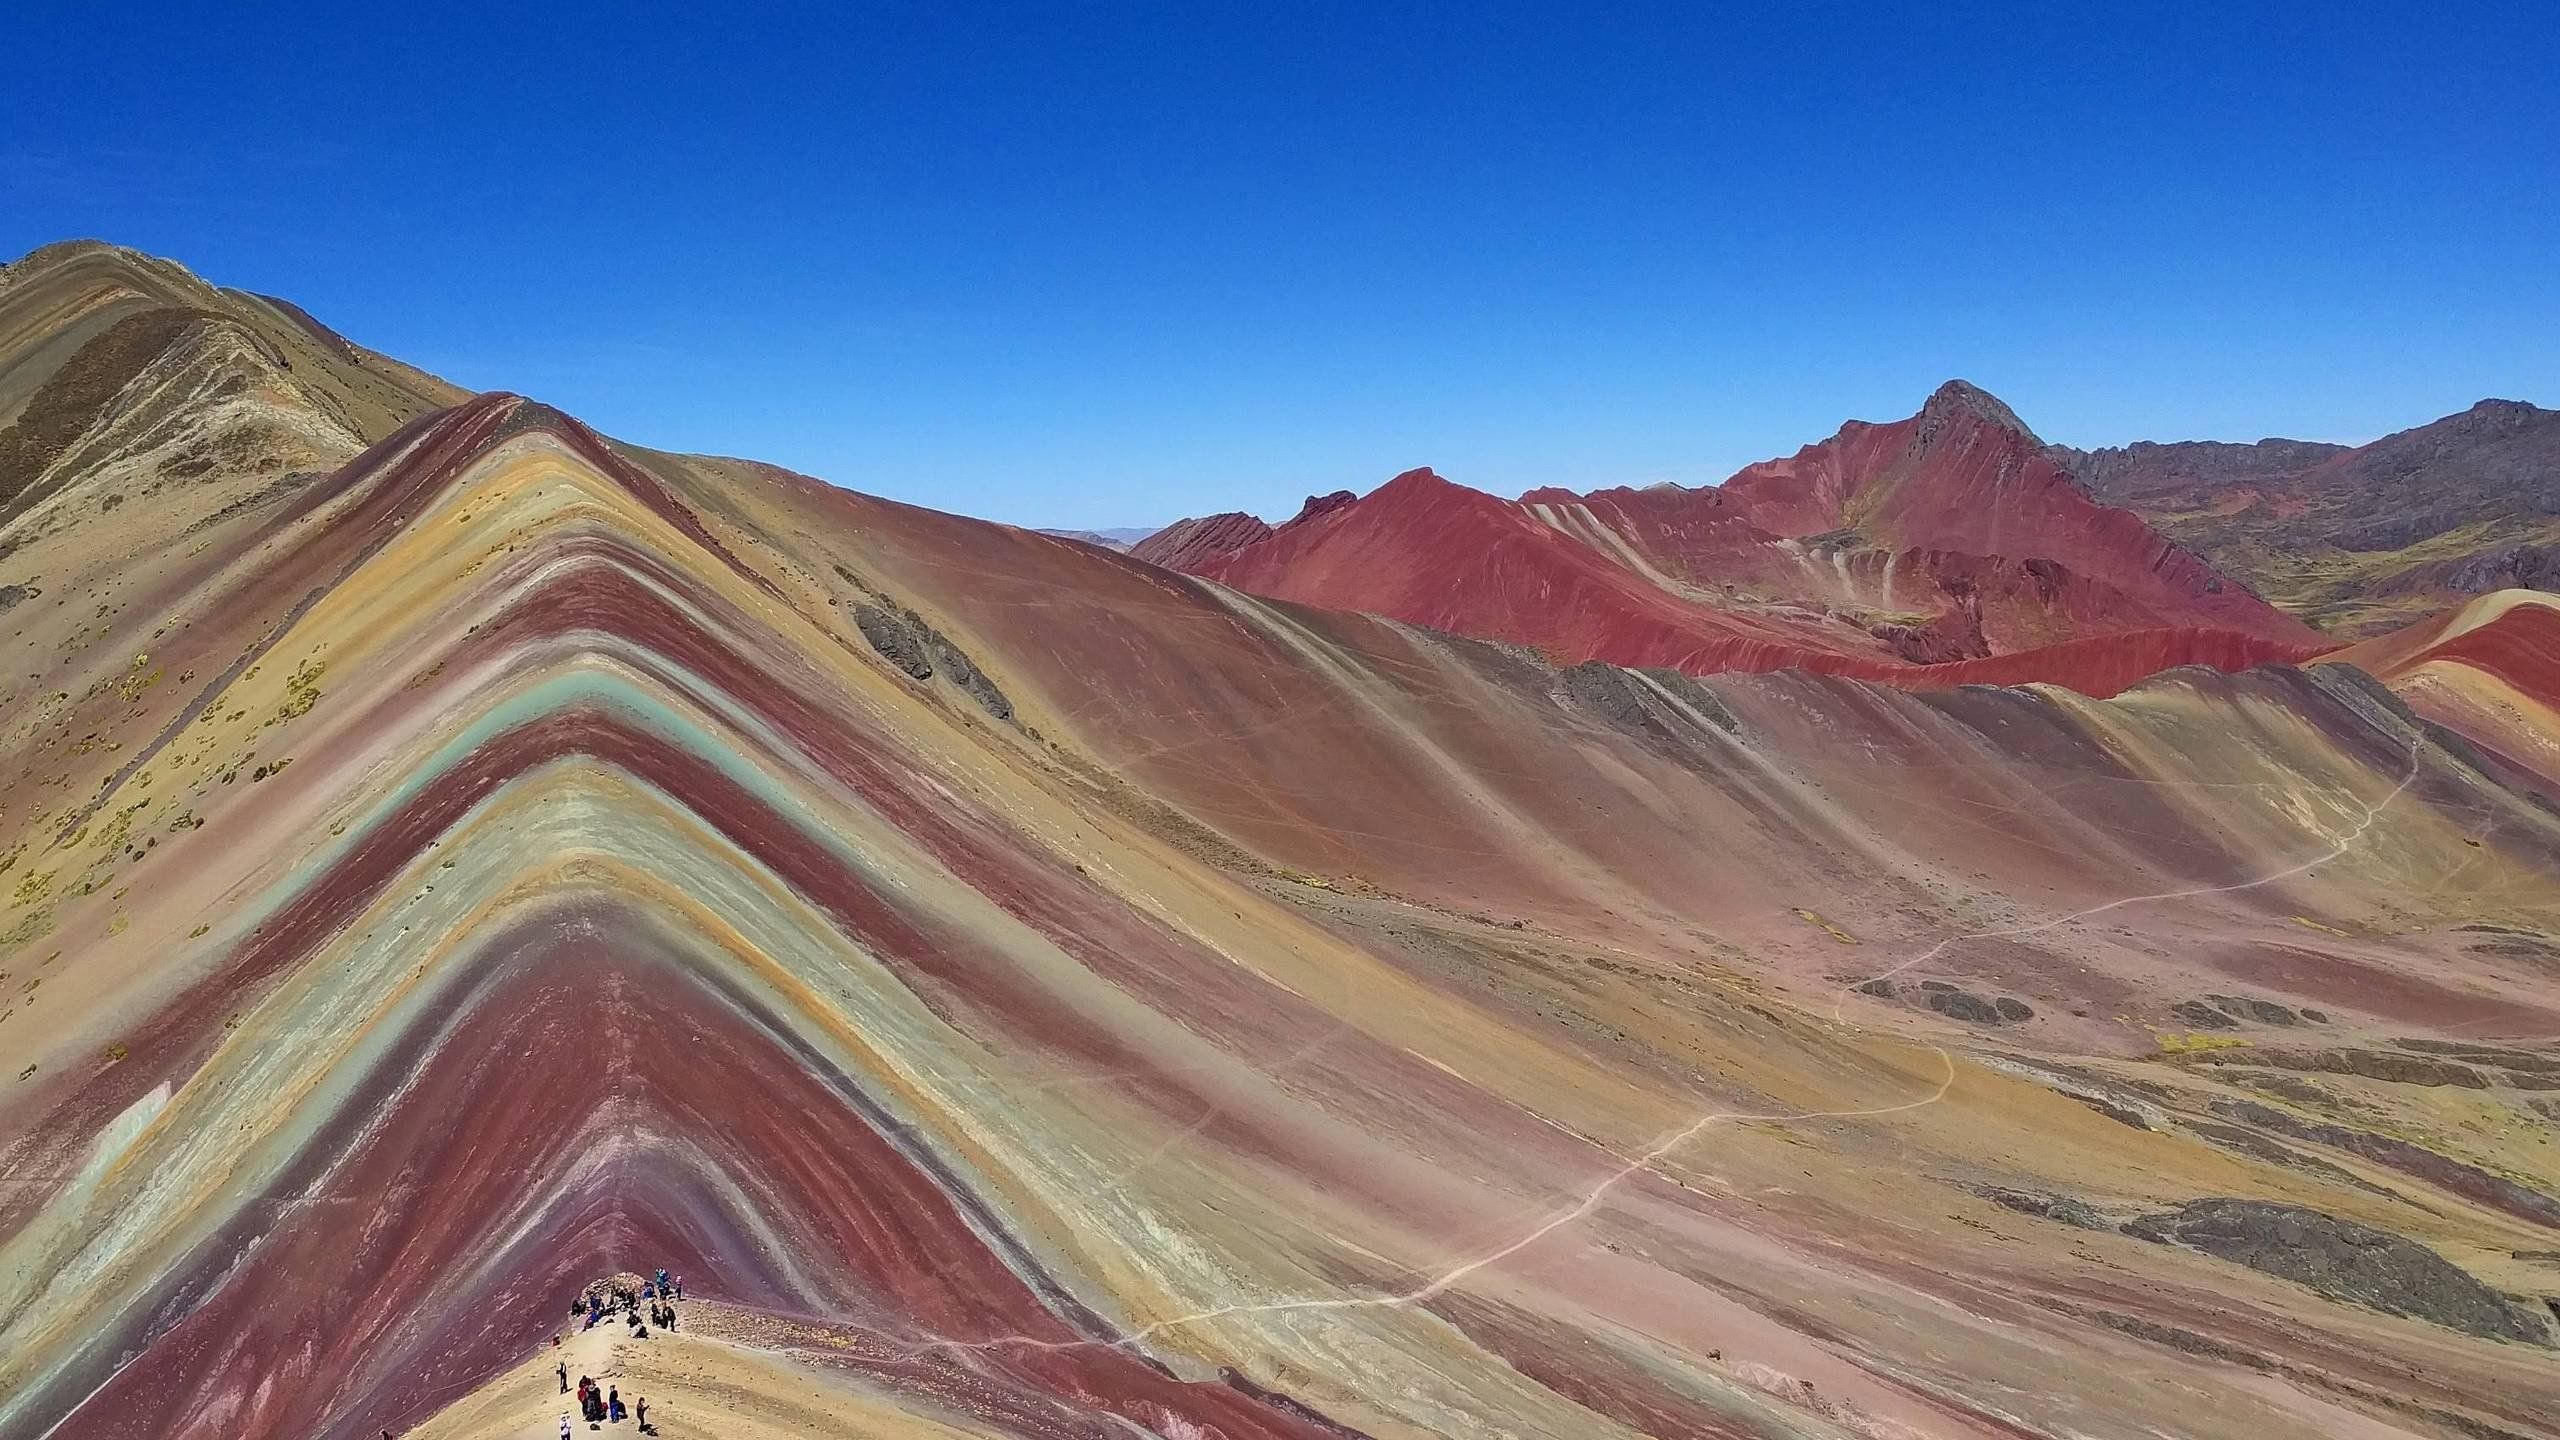 Vinicunca 4K wallpaper for your desktop or mobile screen free and easy to download